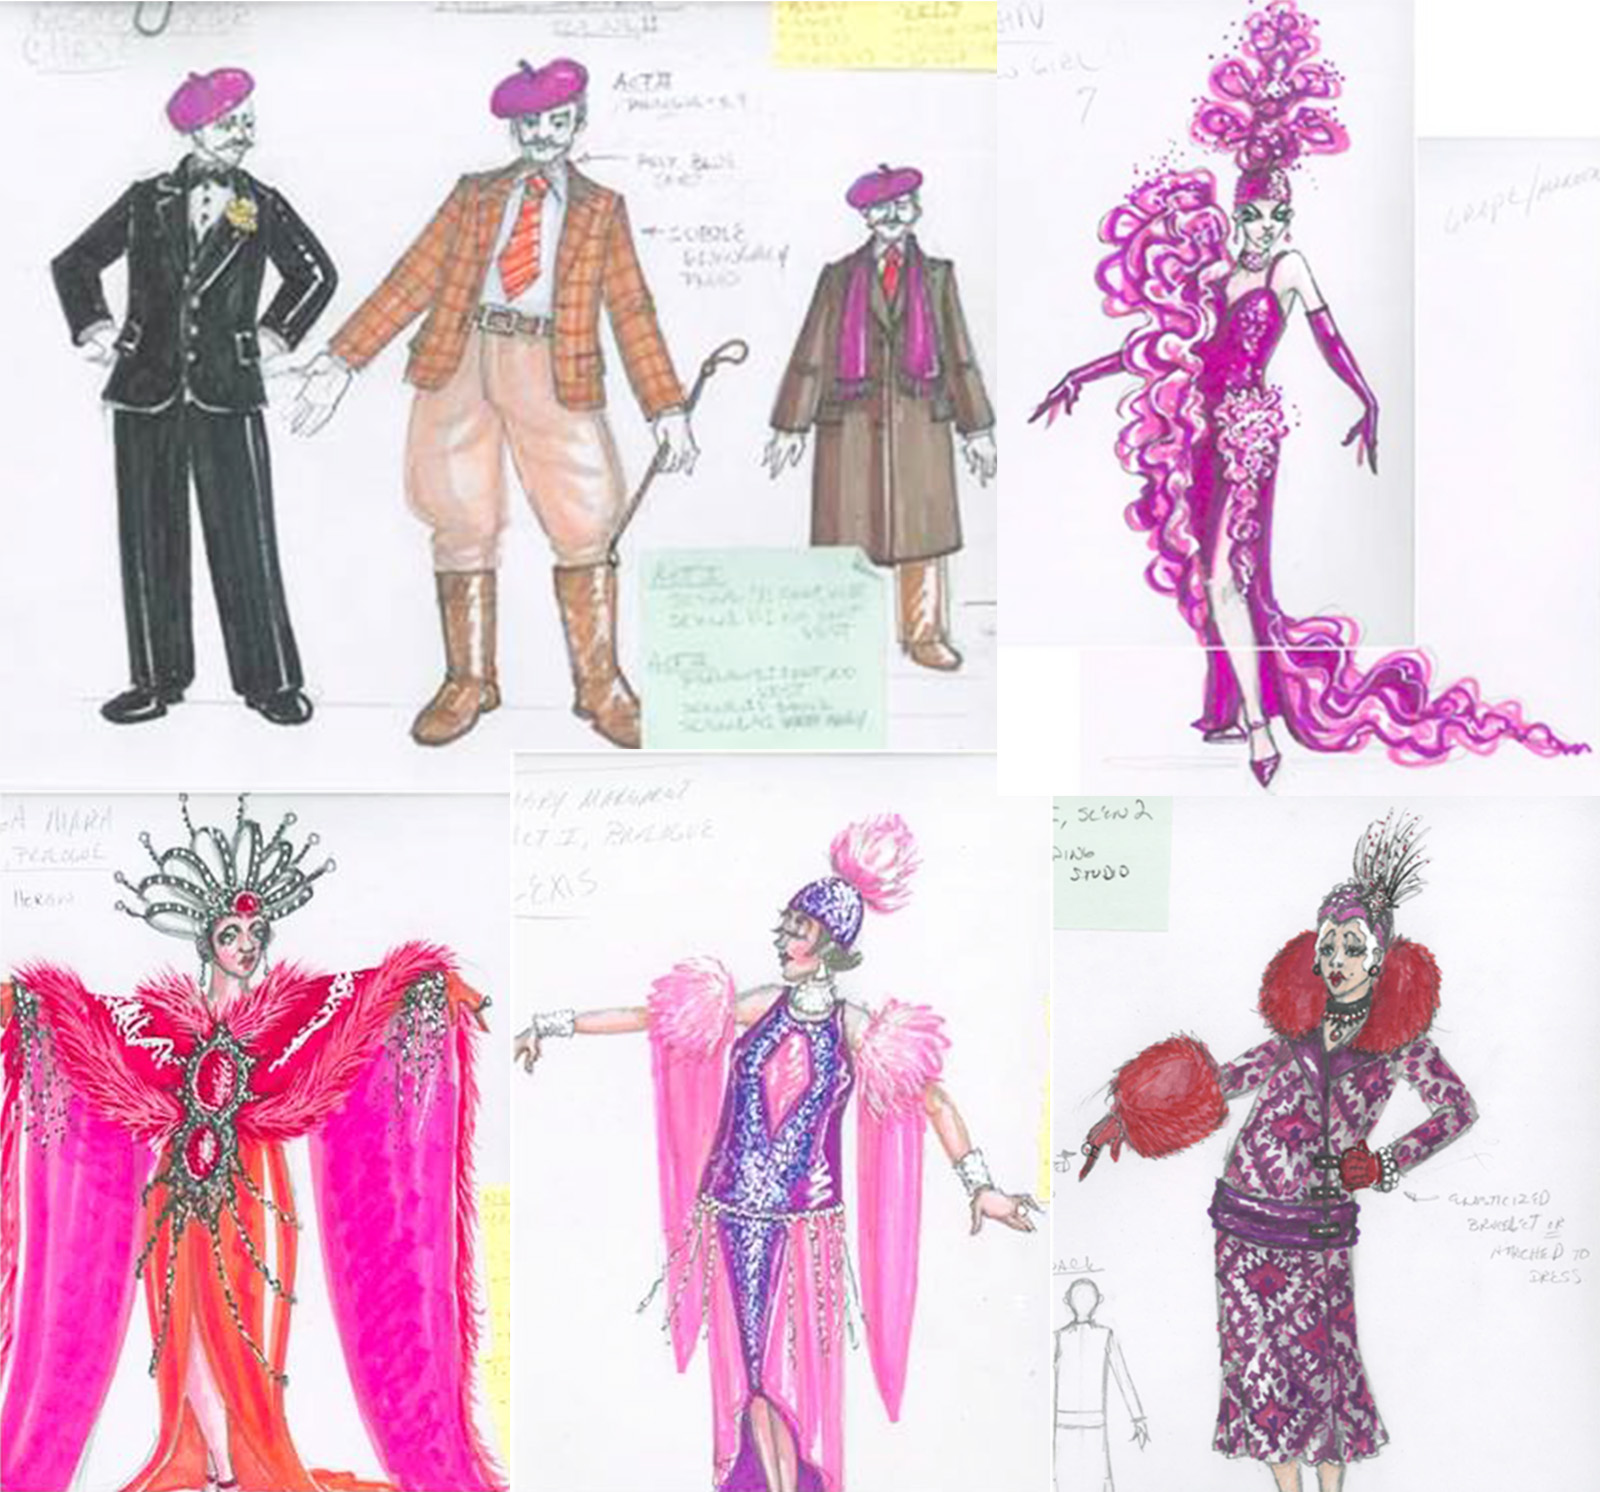 Mary McClung's costume designs